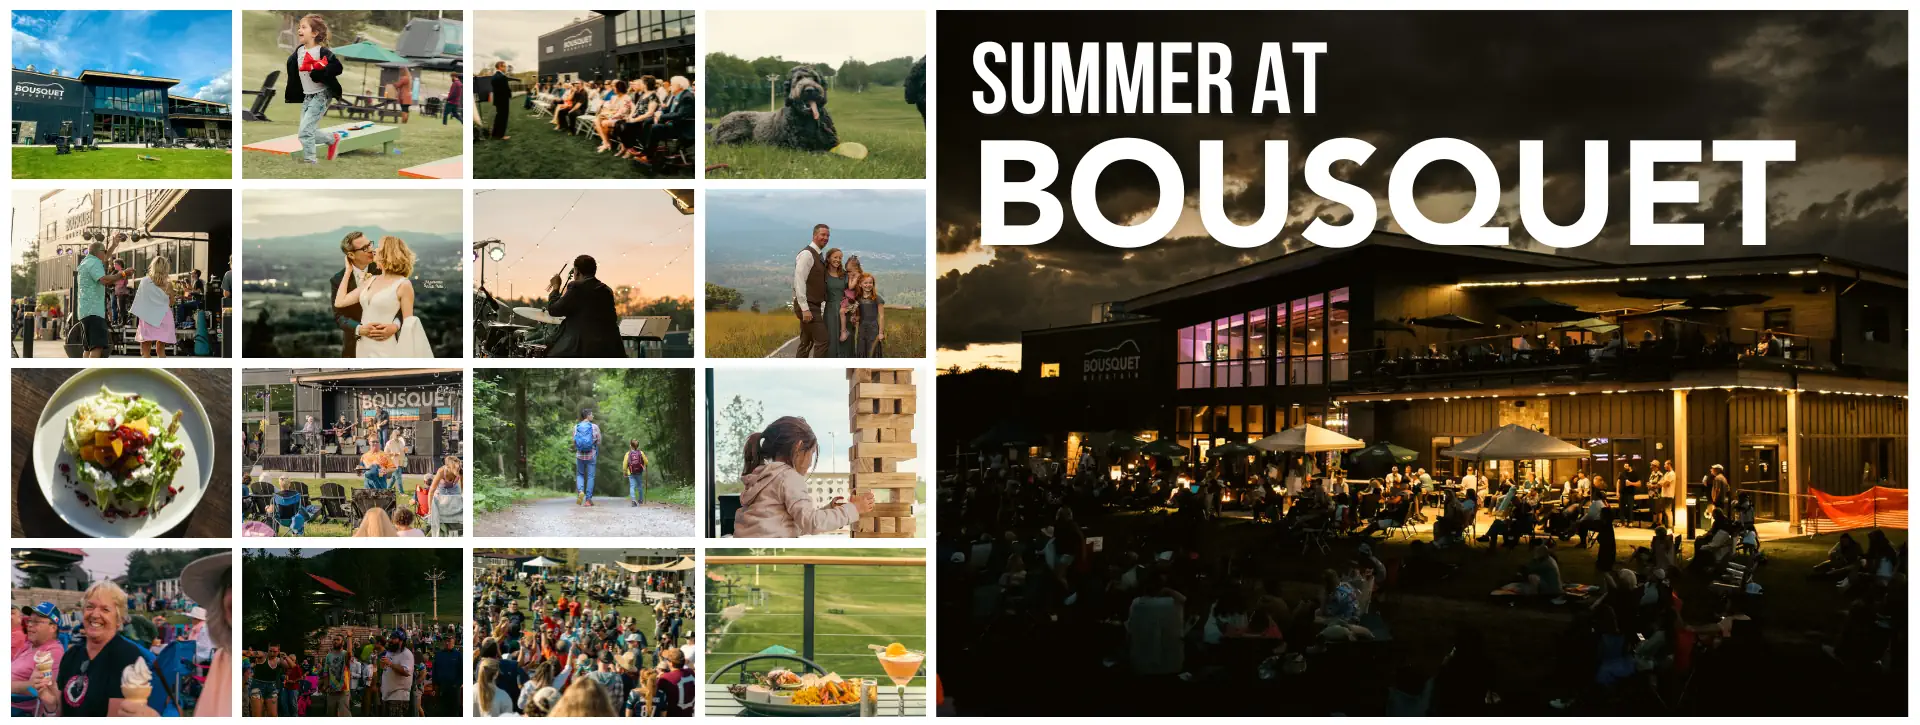 Summer at Bousquet Mountain banner image, with concerts, weddings, food, and hiking